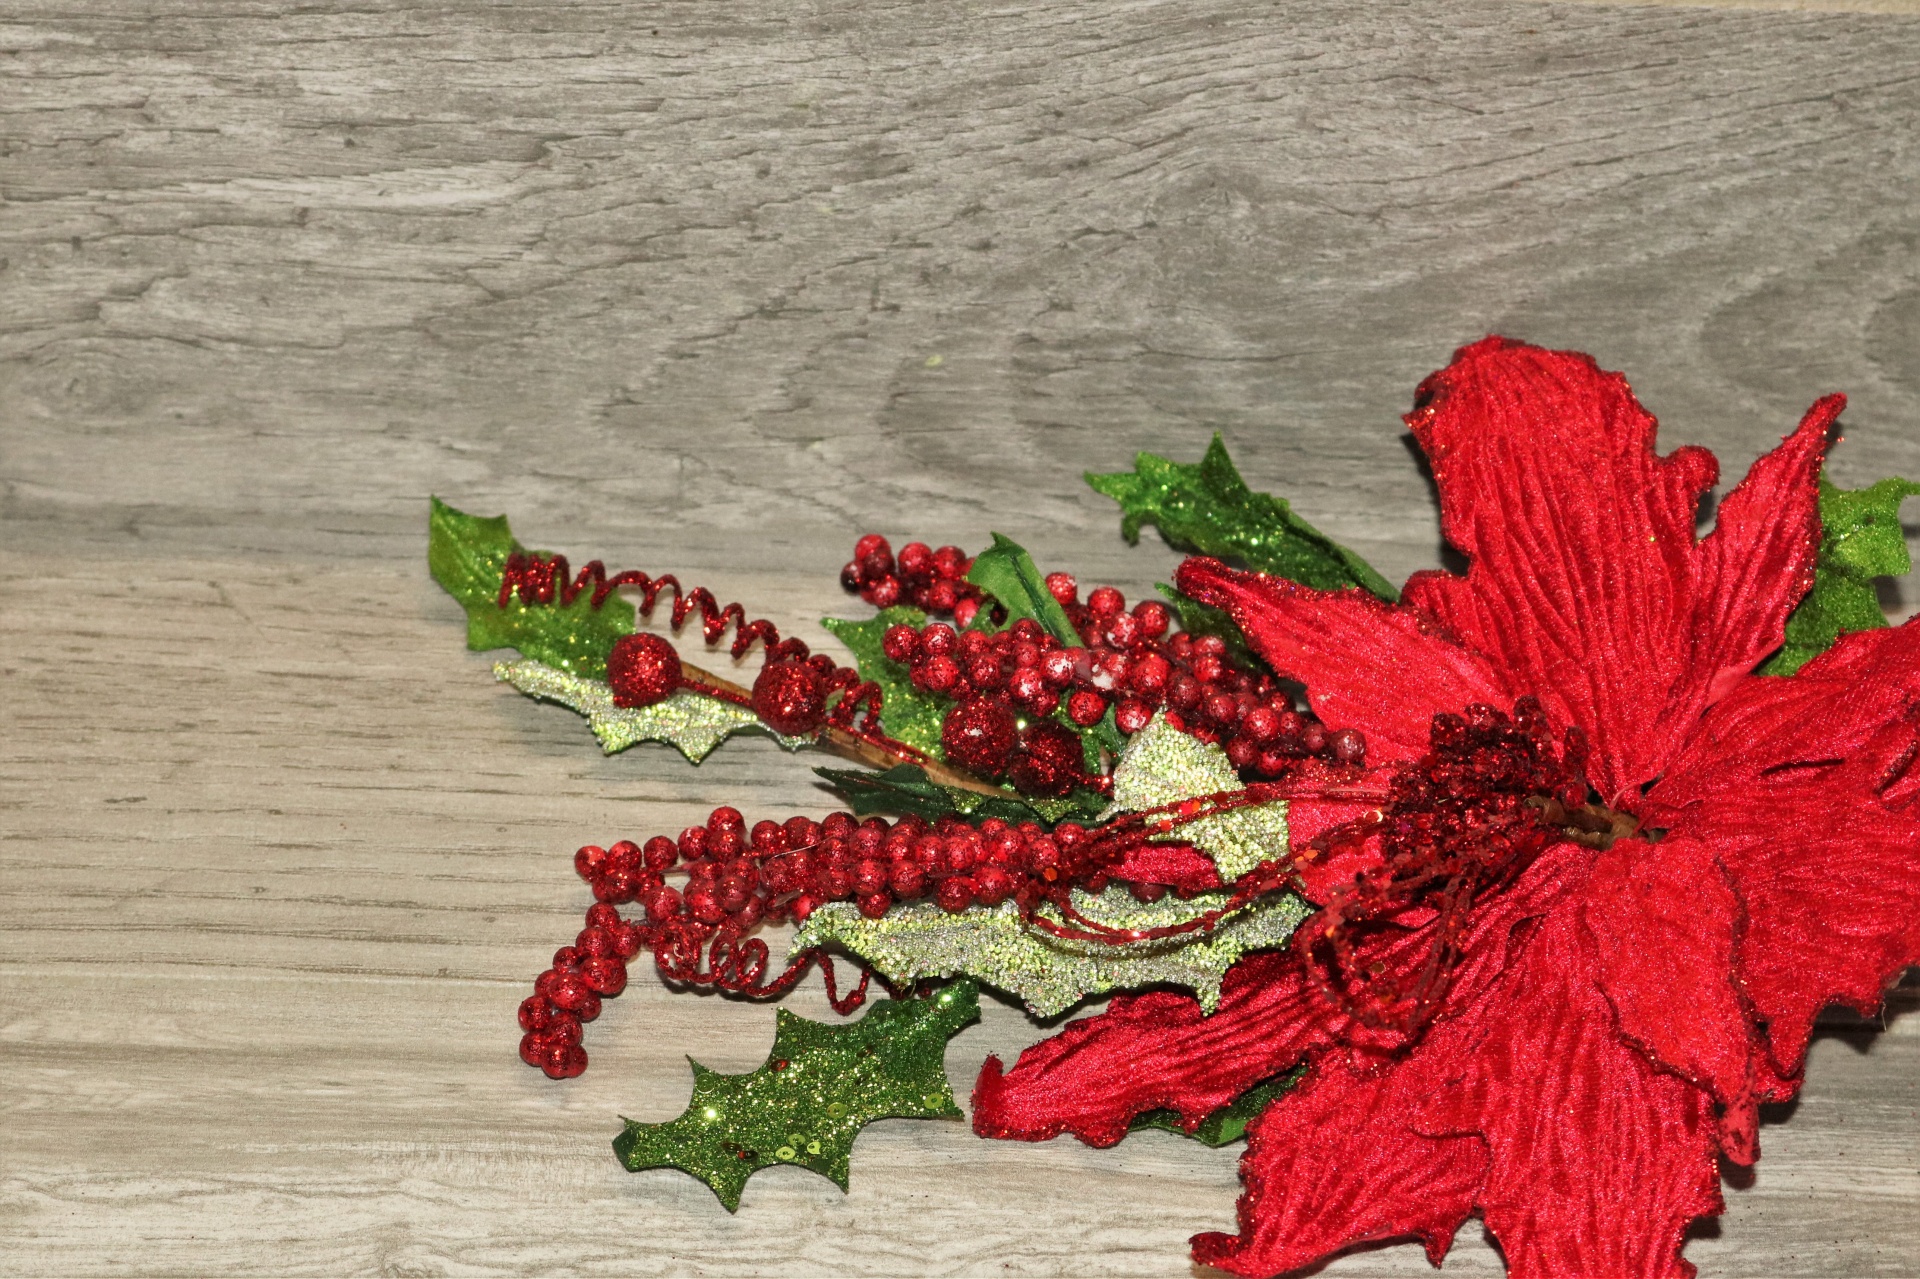 Close-up of a sparkling red poinsettia flower, with green holly leaves and red berries, on a wood background with copy space.